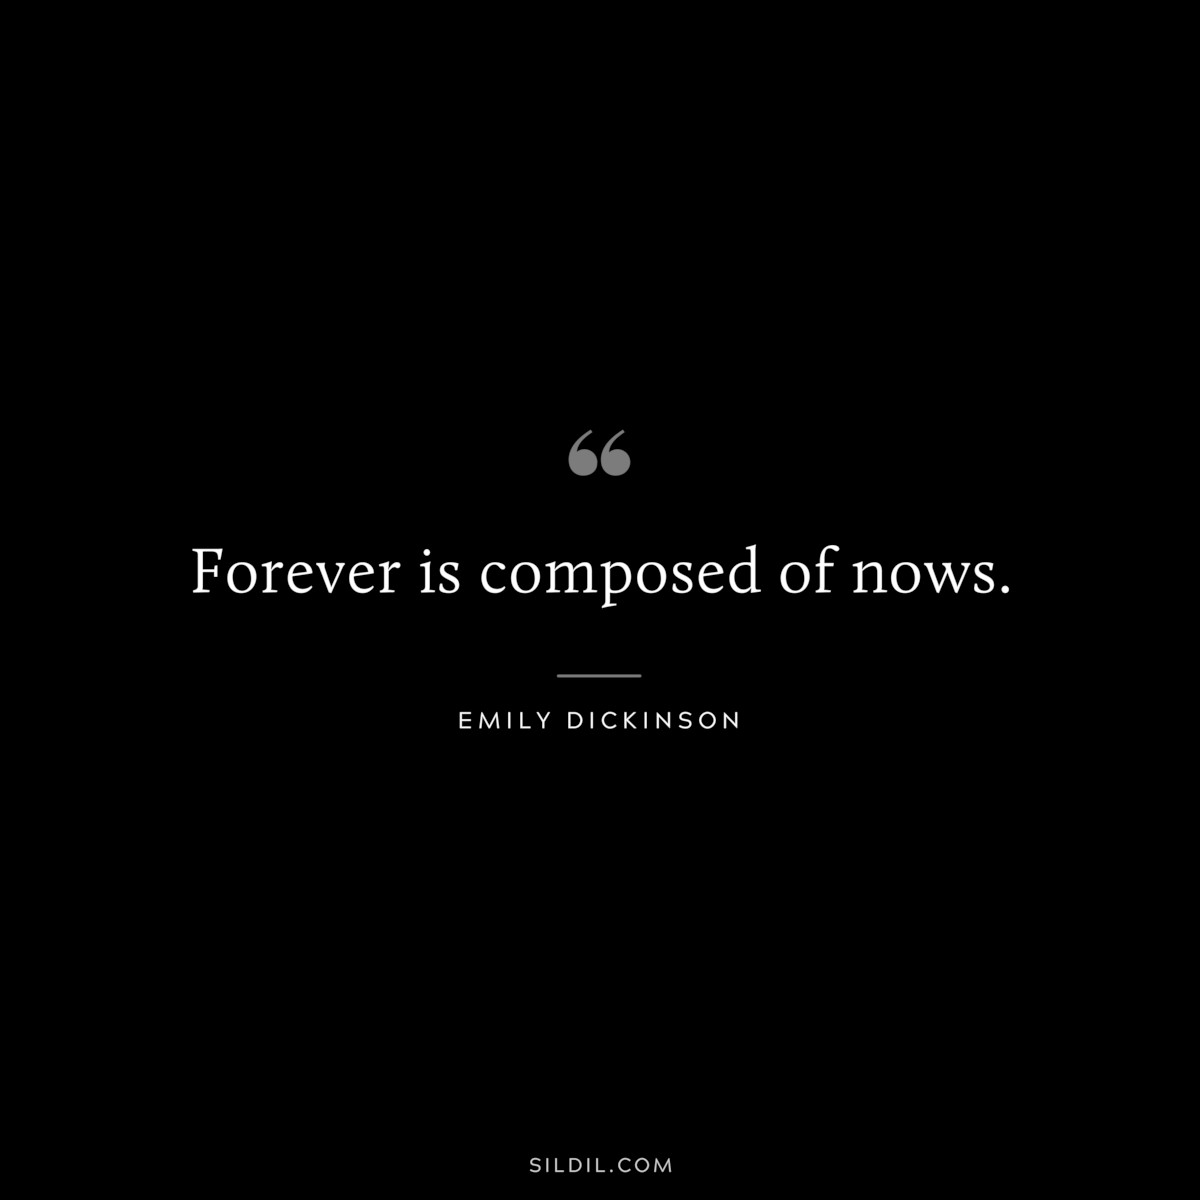 Forever is composed of nows.